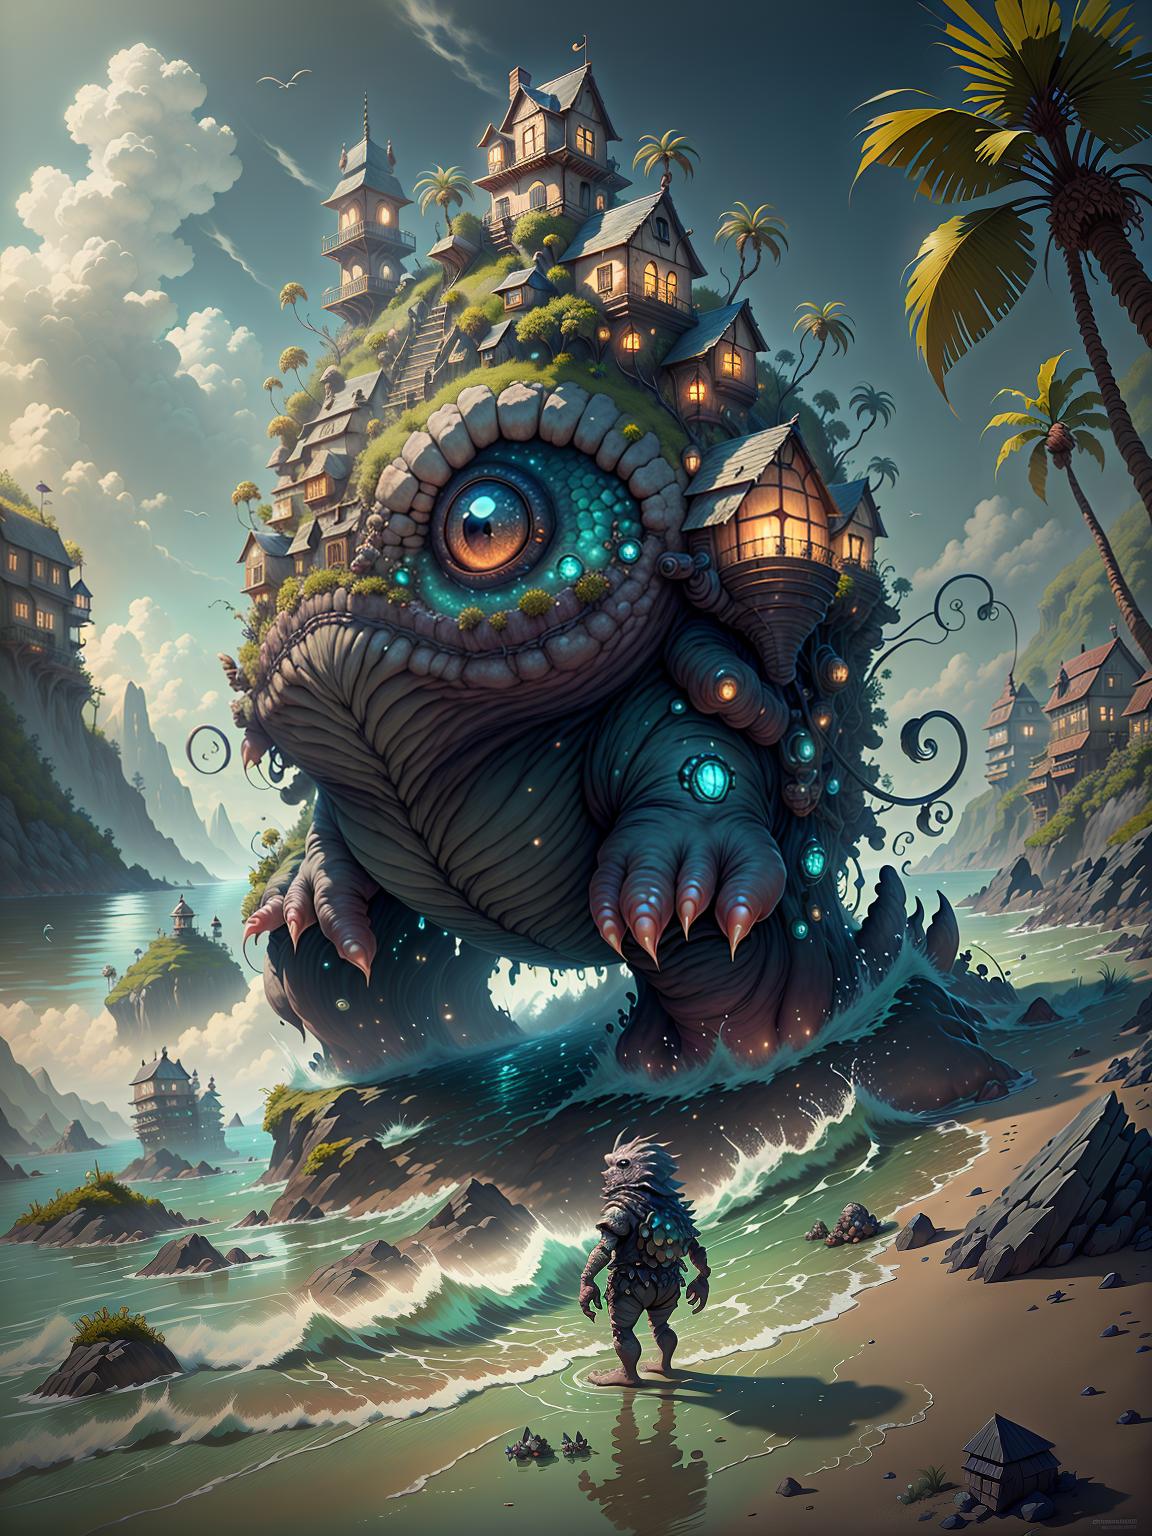  master piece, best quality, ultra detailed, highres, 4k.8k, Behemoth Turtle, Looming over the village, Menacing, BREAK A monstrous behemoth turtle terrorizes a coastal village., Coastal village, Huts, fishing boats, palm trees, cliffs, BREAK Tense and fearful, Giant footsteps, crashing waves, terrified villagers fleeing, creature00d,Cu73Cre4ture